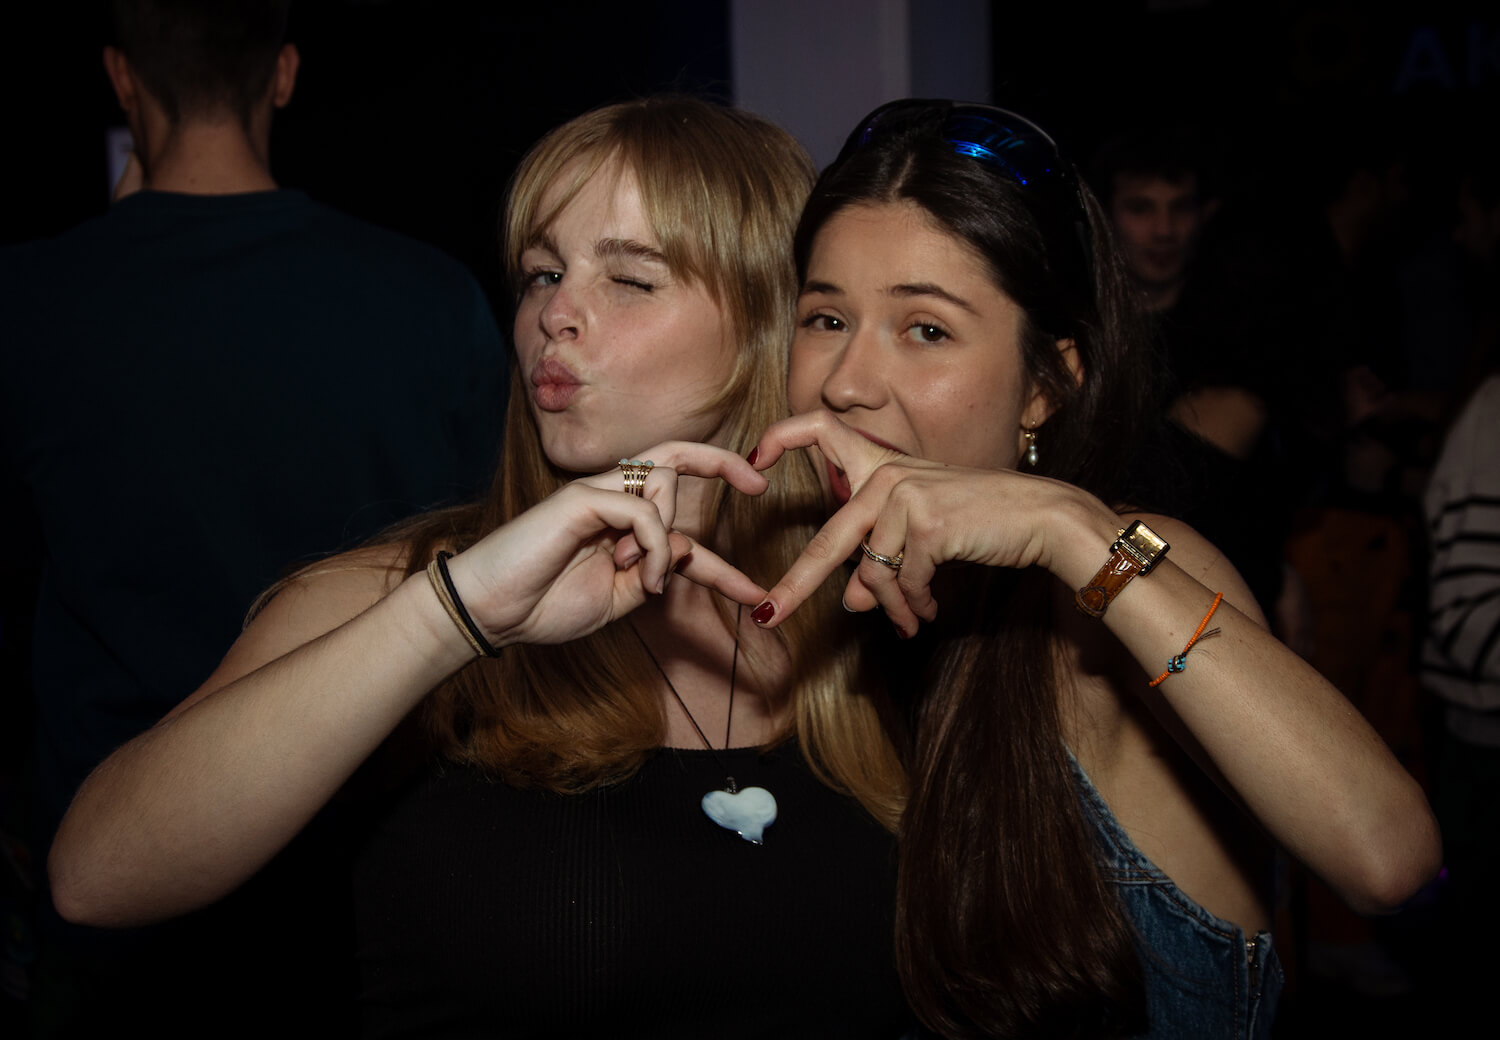 Girls do a heart with their fingers in Akademien Nightclub.